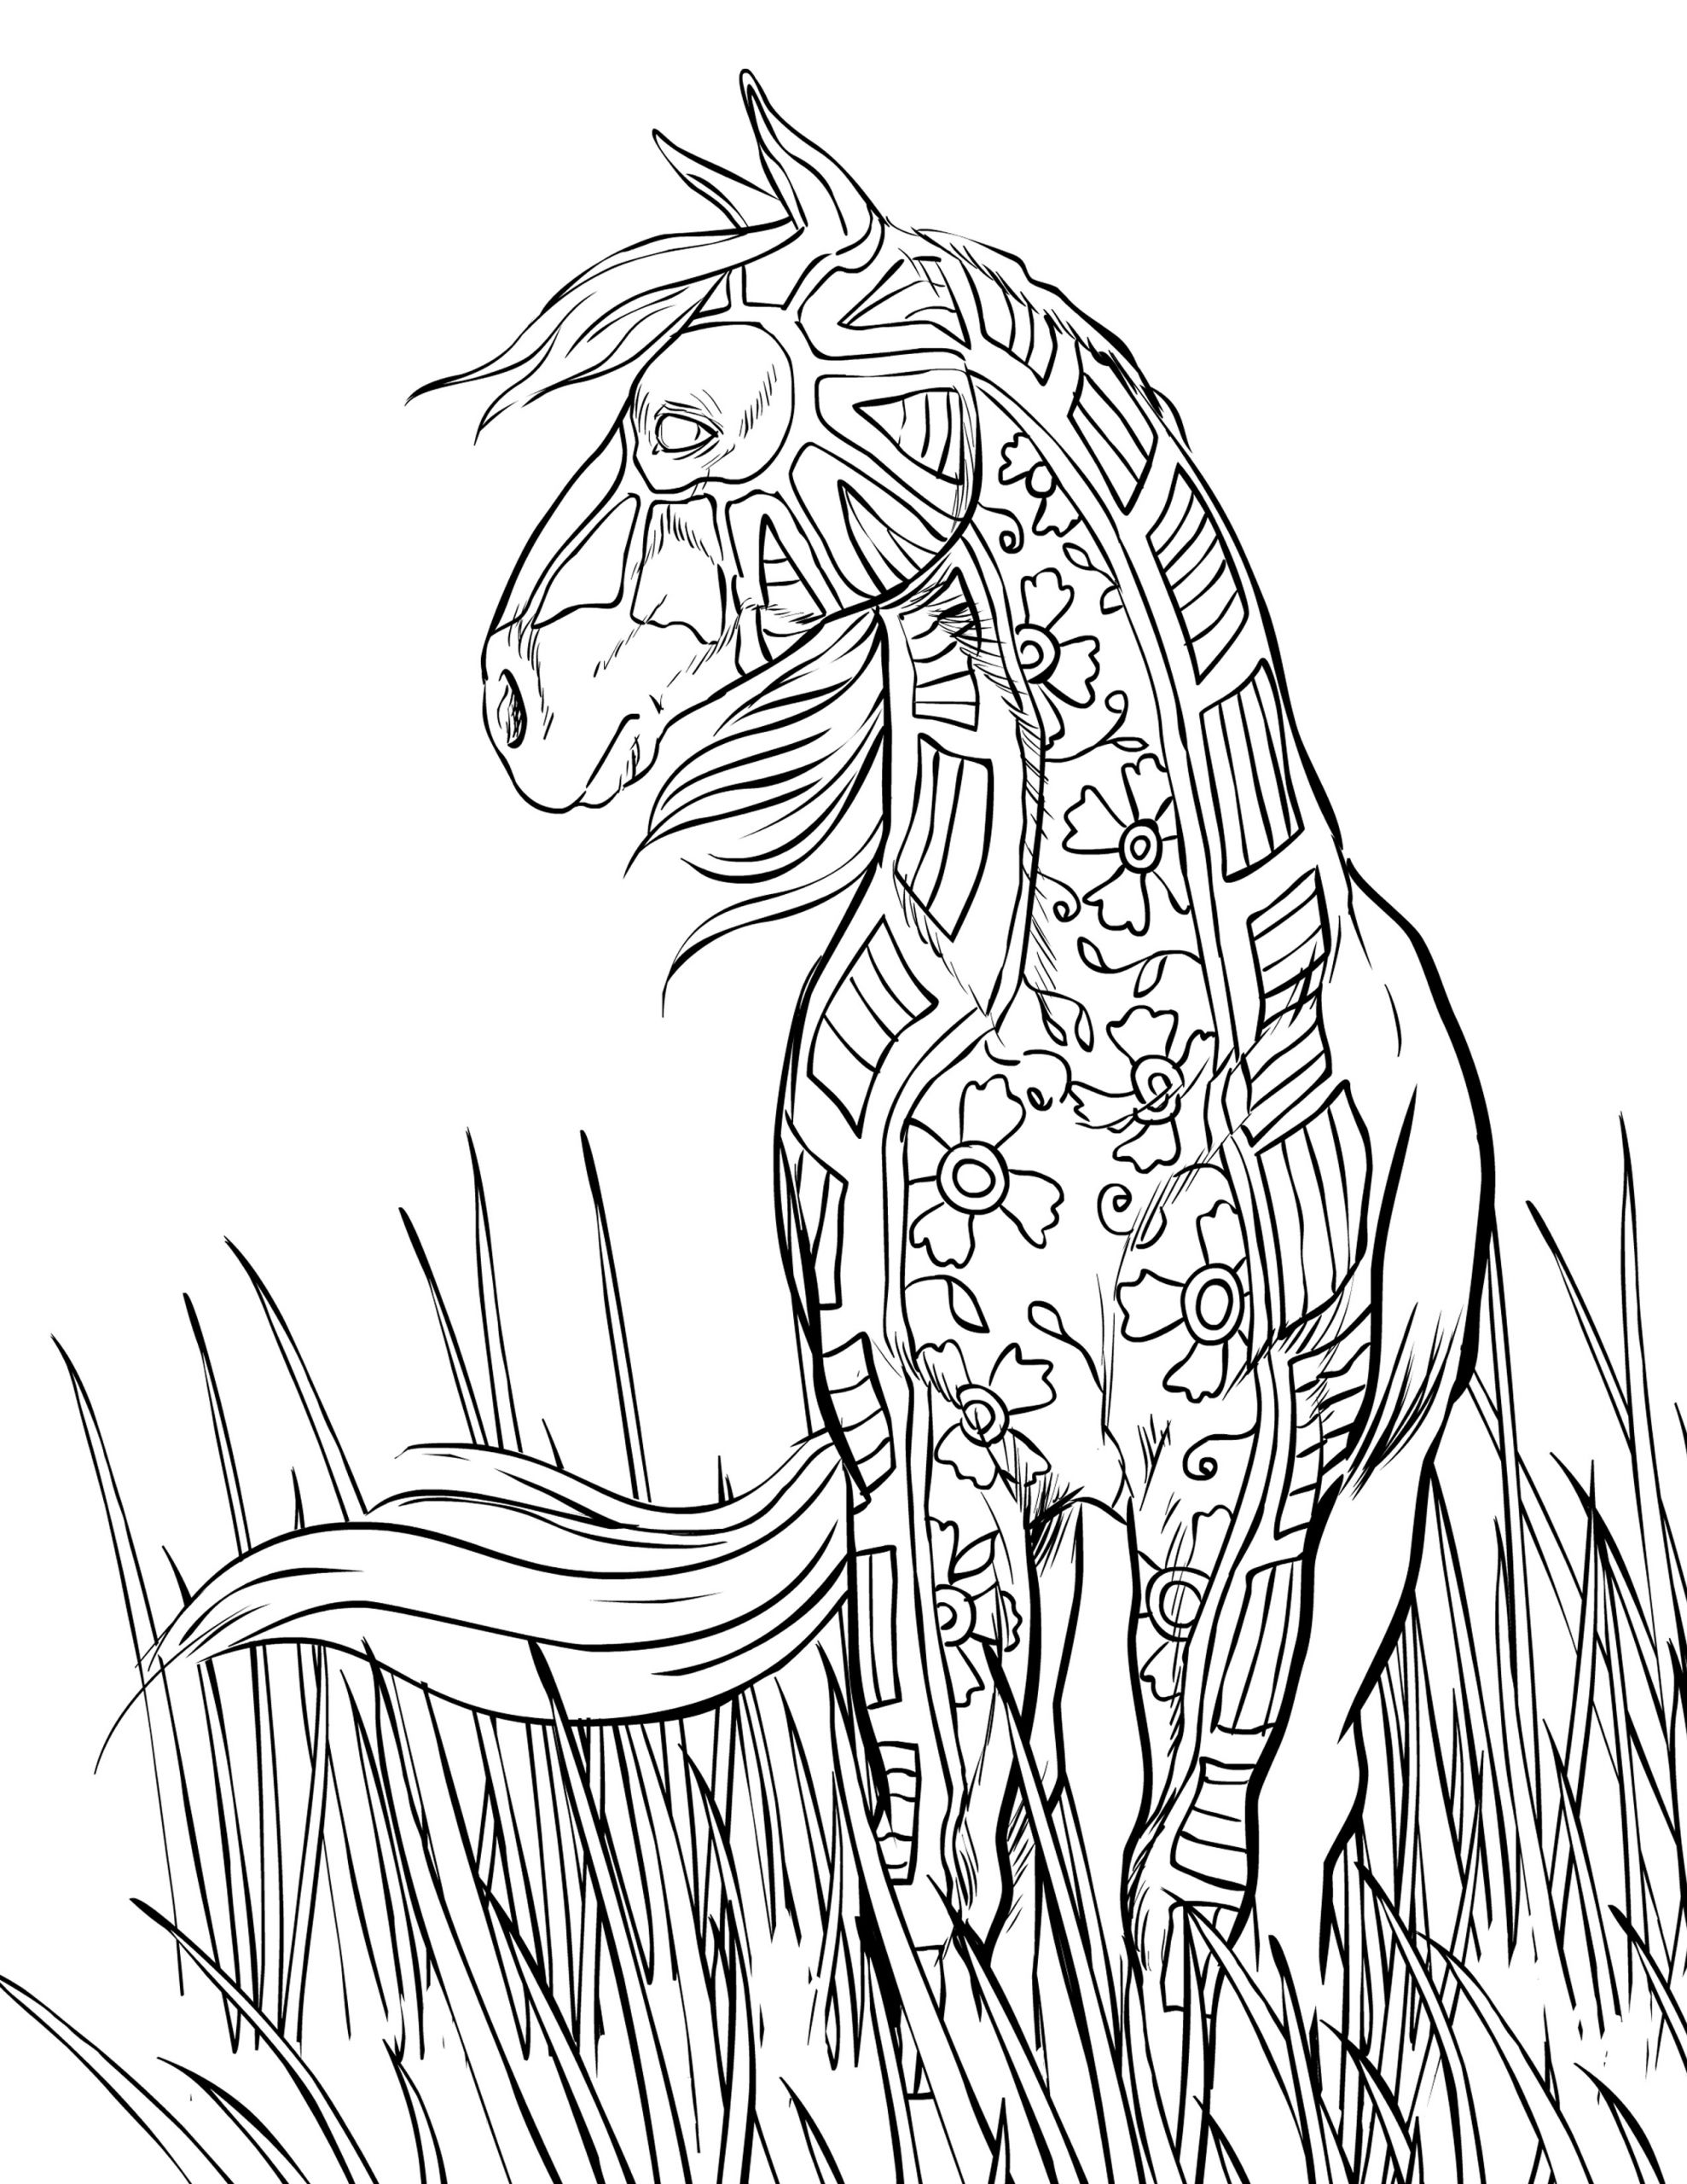 Adult Coloring Book Horse
 FREE HORSE COLORING PAGES